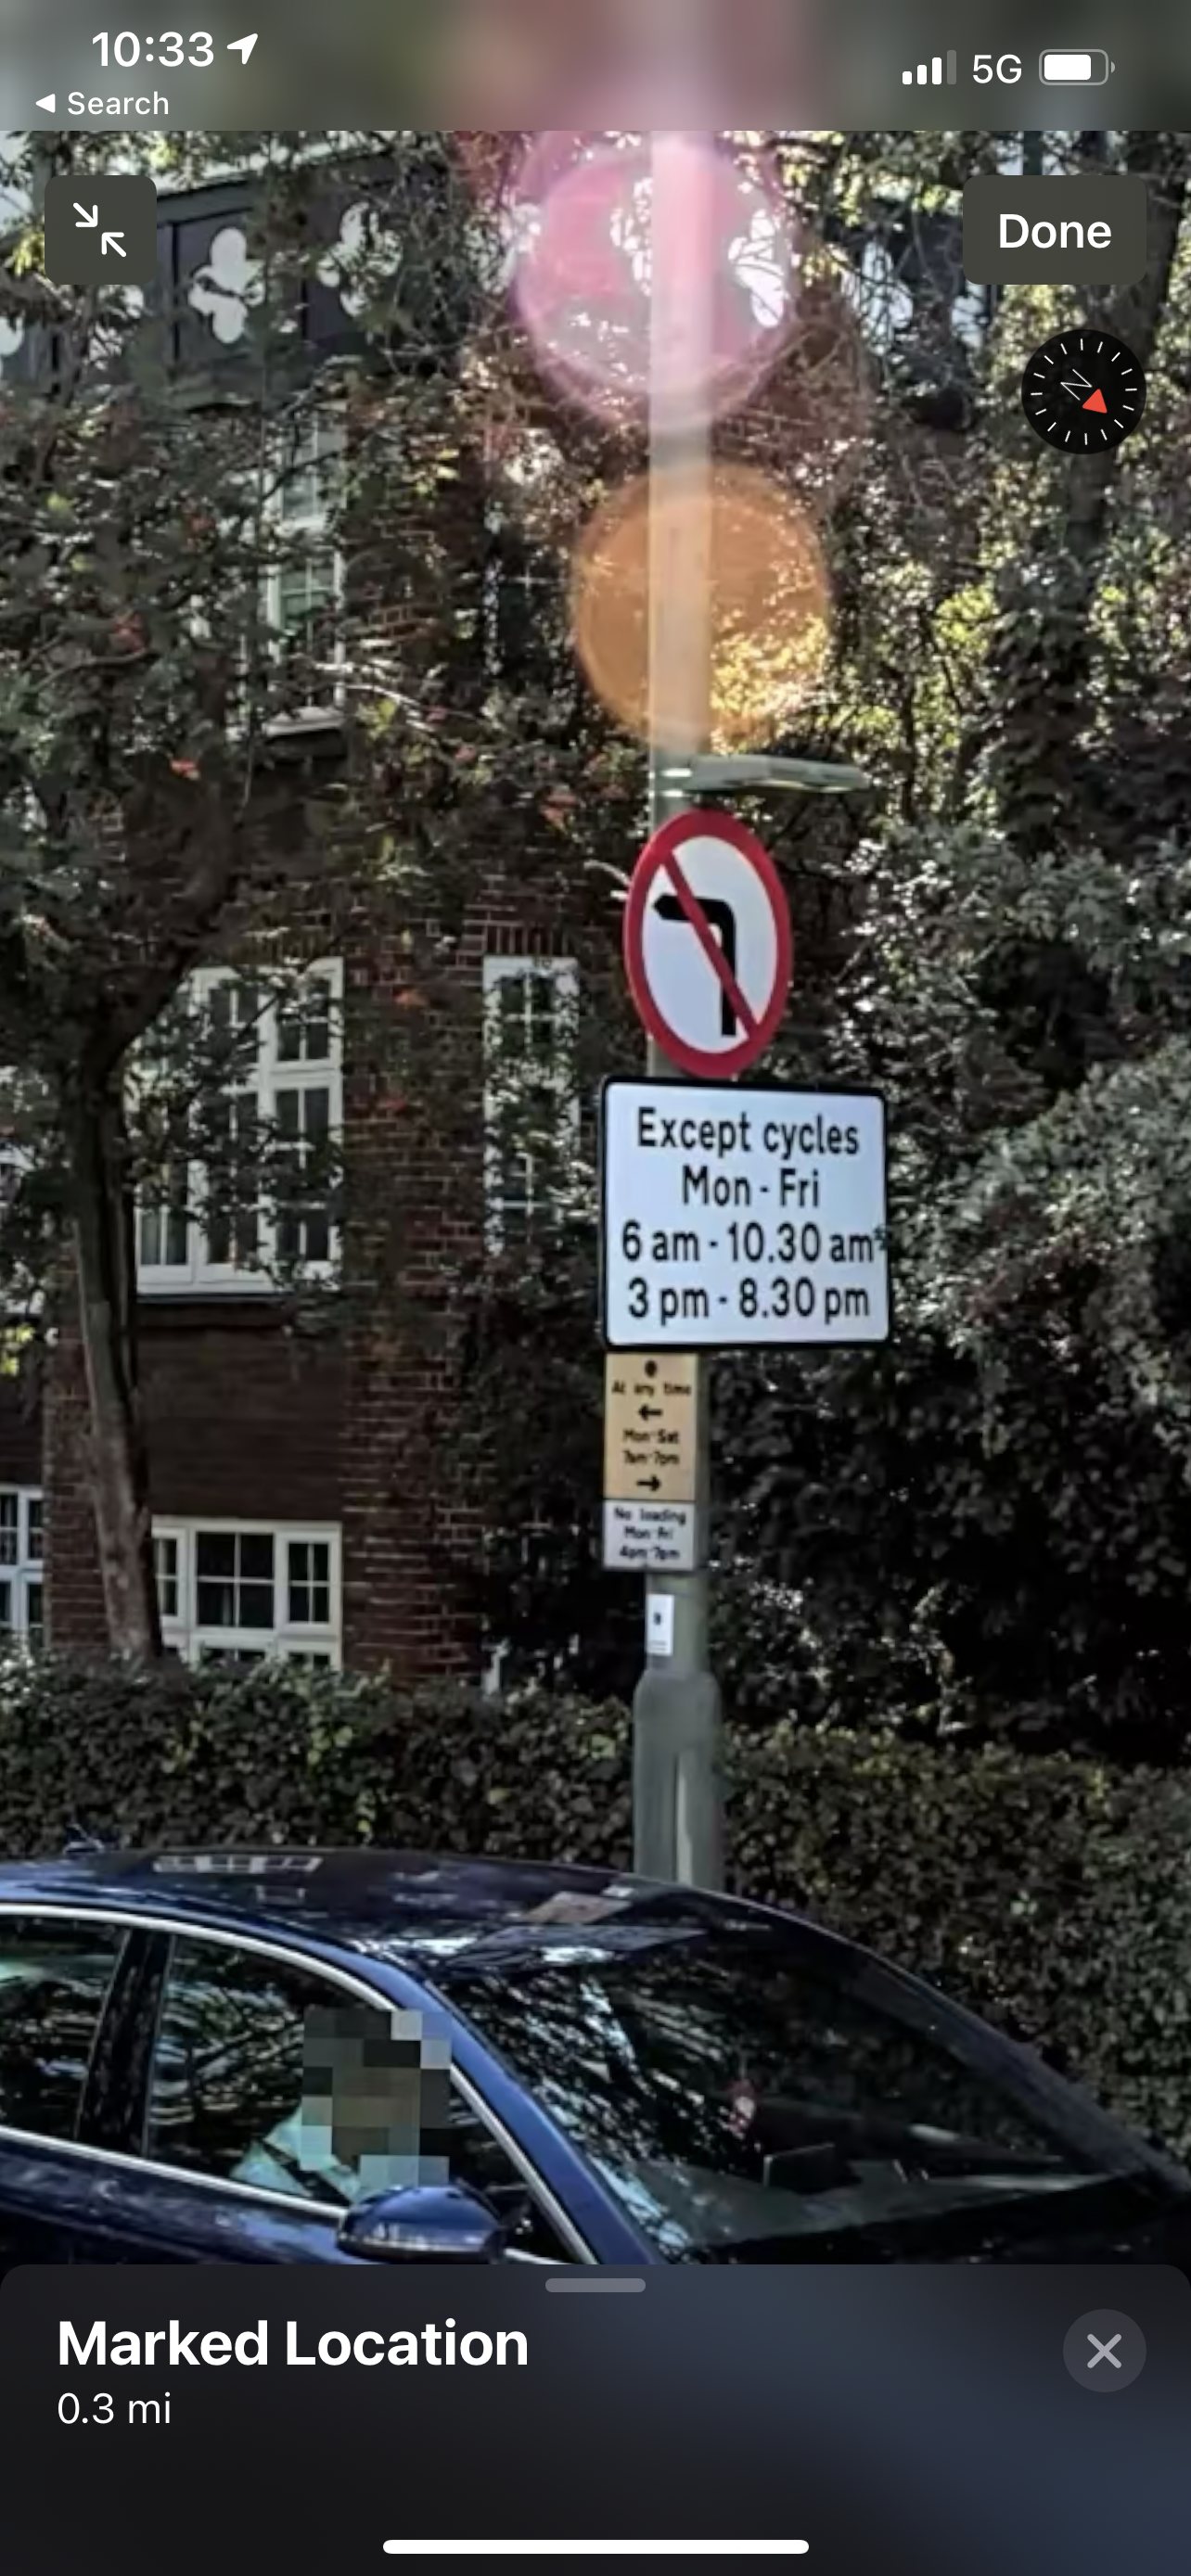 No right turn sign. - Page 1 - Speed, Plod & the Law - PistonHeads UK